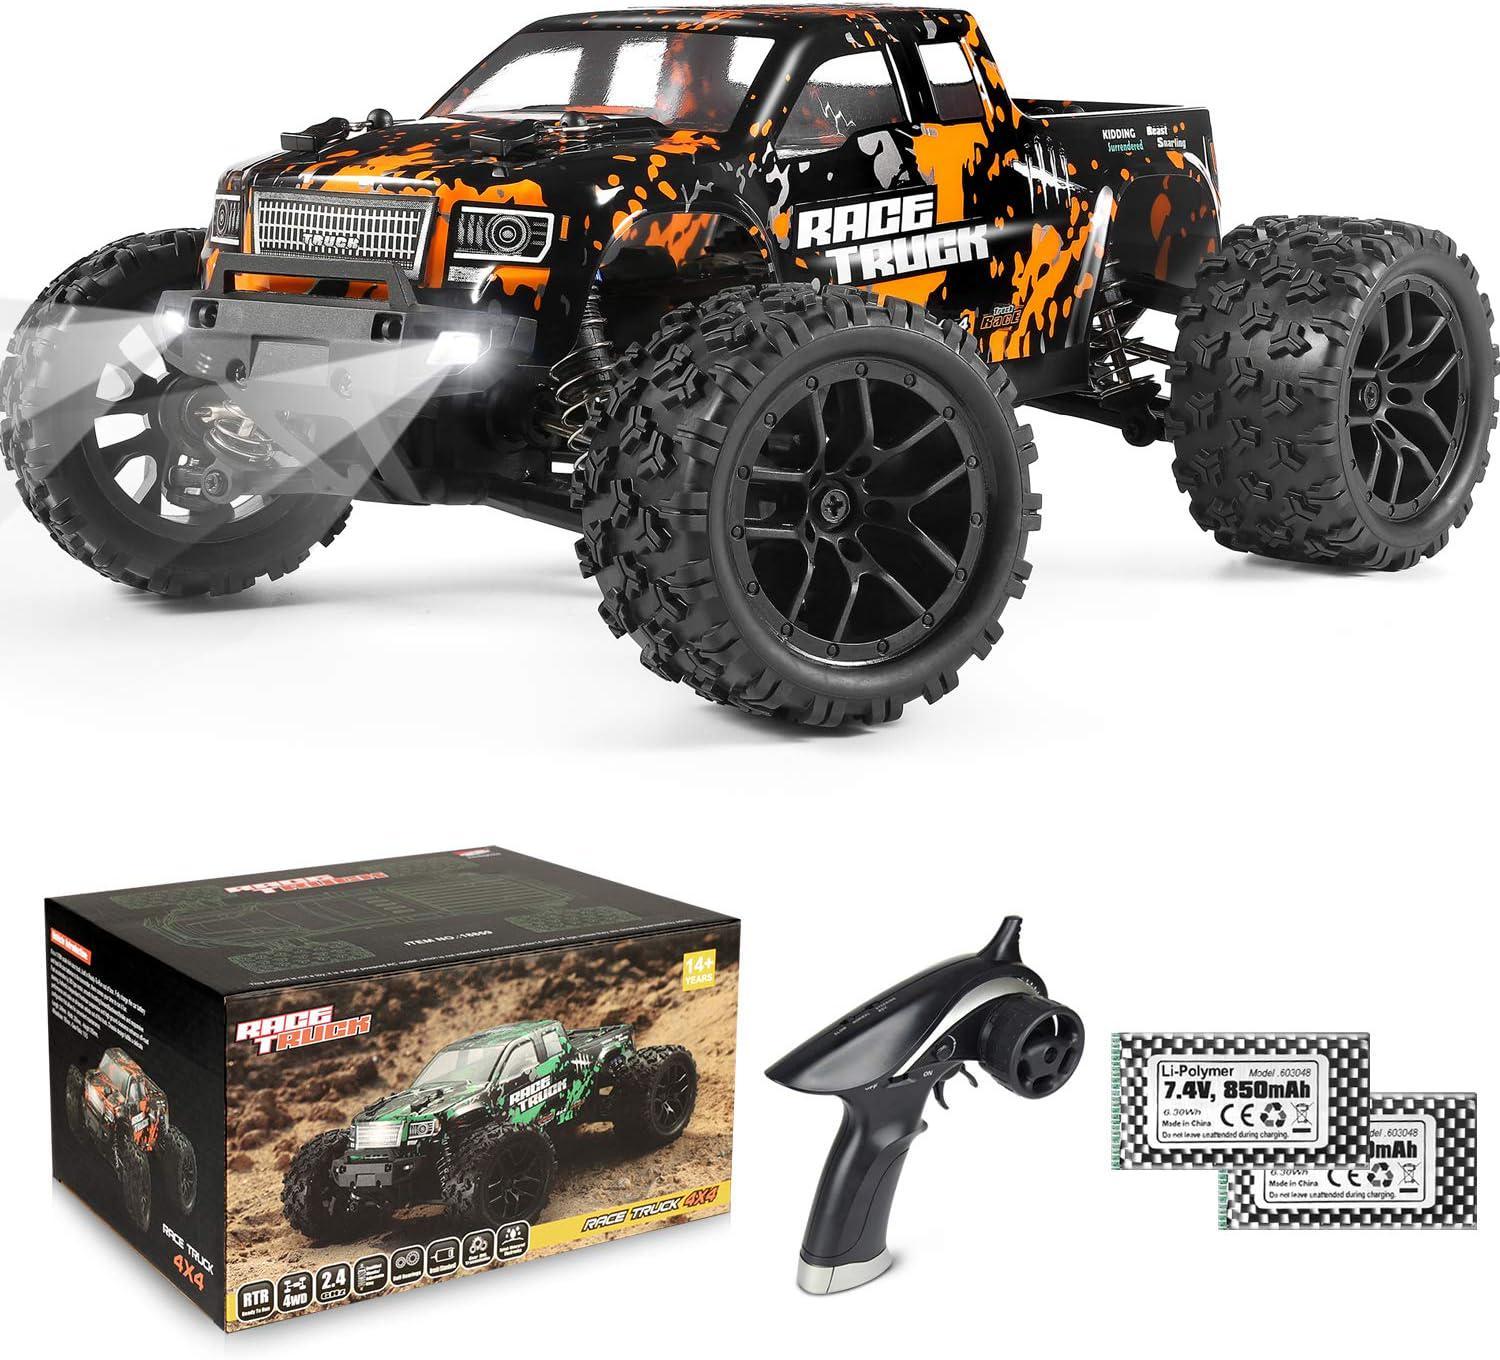 Haiboxing 16890 1/16th Brushed Rc Monster Truck All-Terrain